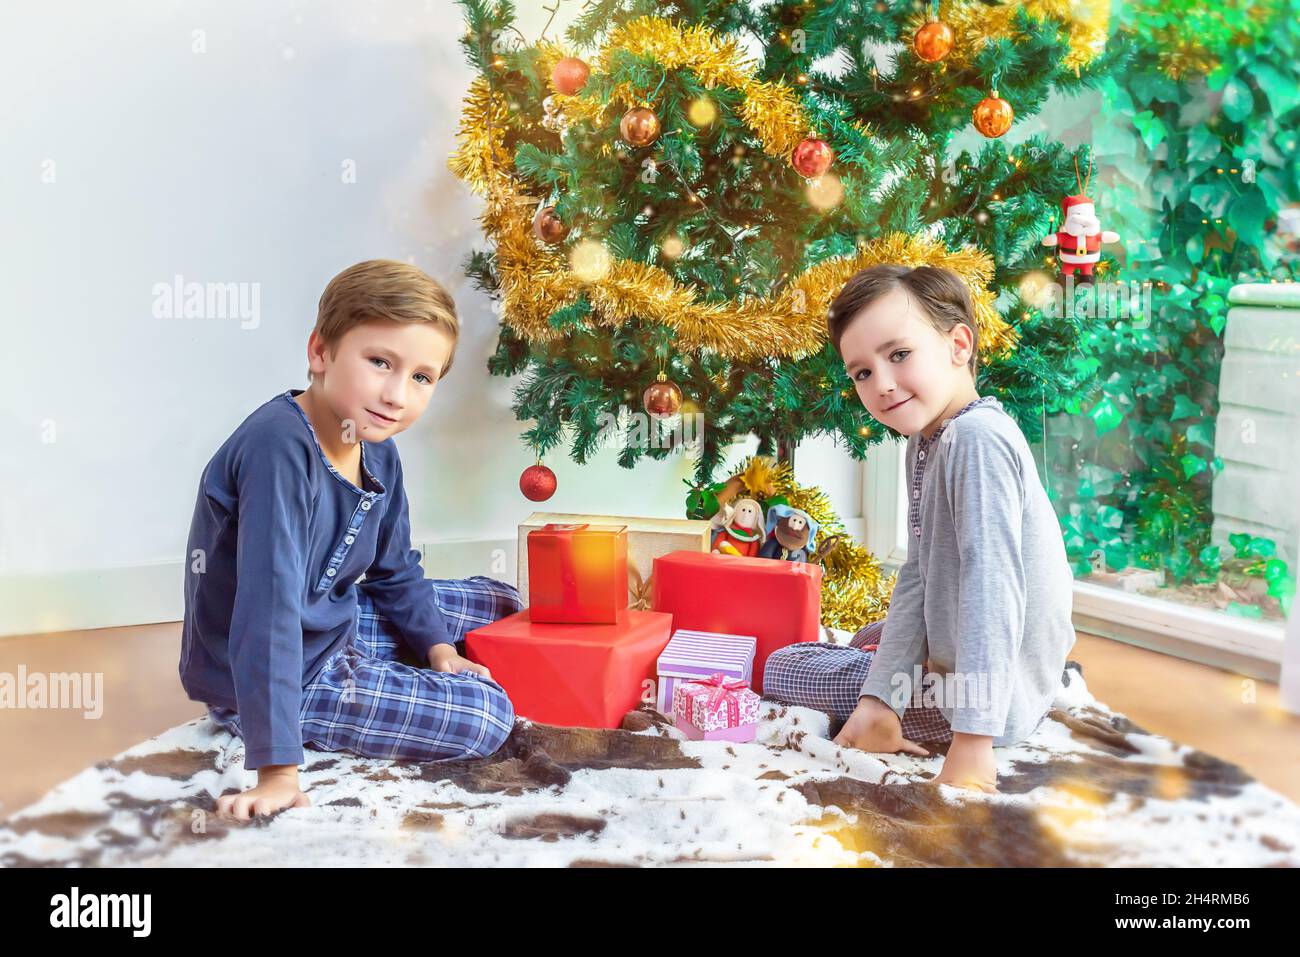 Children by the Christmas tree ready to open their presents Stock Photo